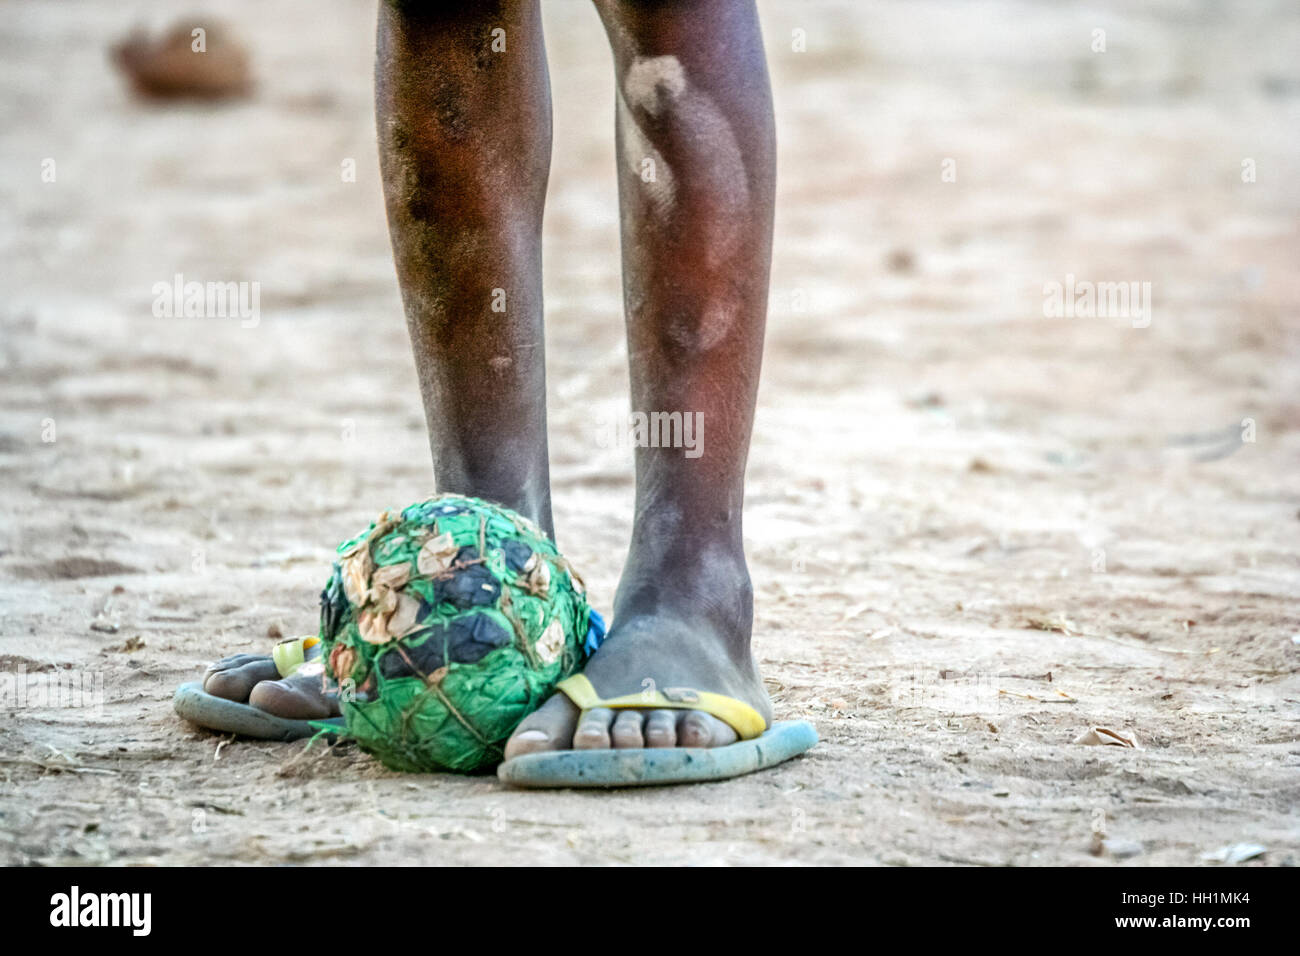 Home-made football ball at the feet of poor african boy Stock Photo